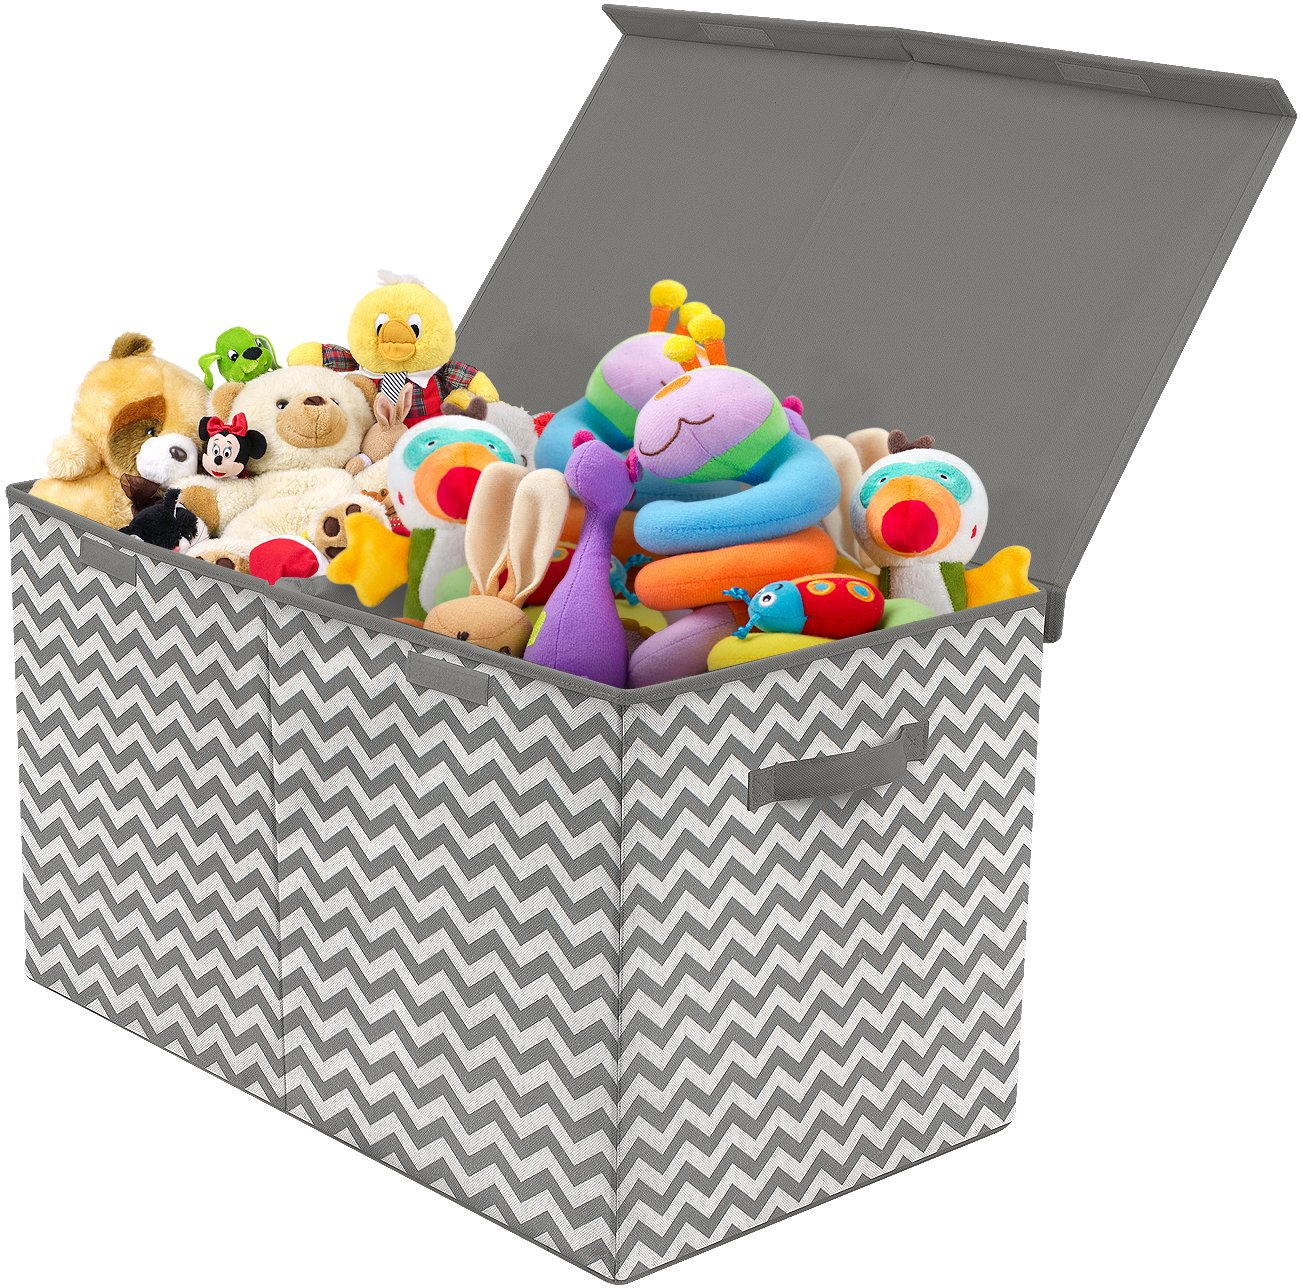 Sorbus Toy Chest with Flip-Top Lid, Kids Collapsible Storage for Nursery, Playroom, Closet, Home Organization, Large (Pattern – Chevron Gray)